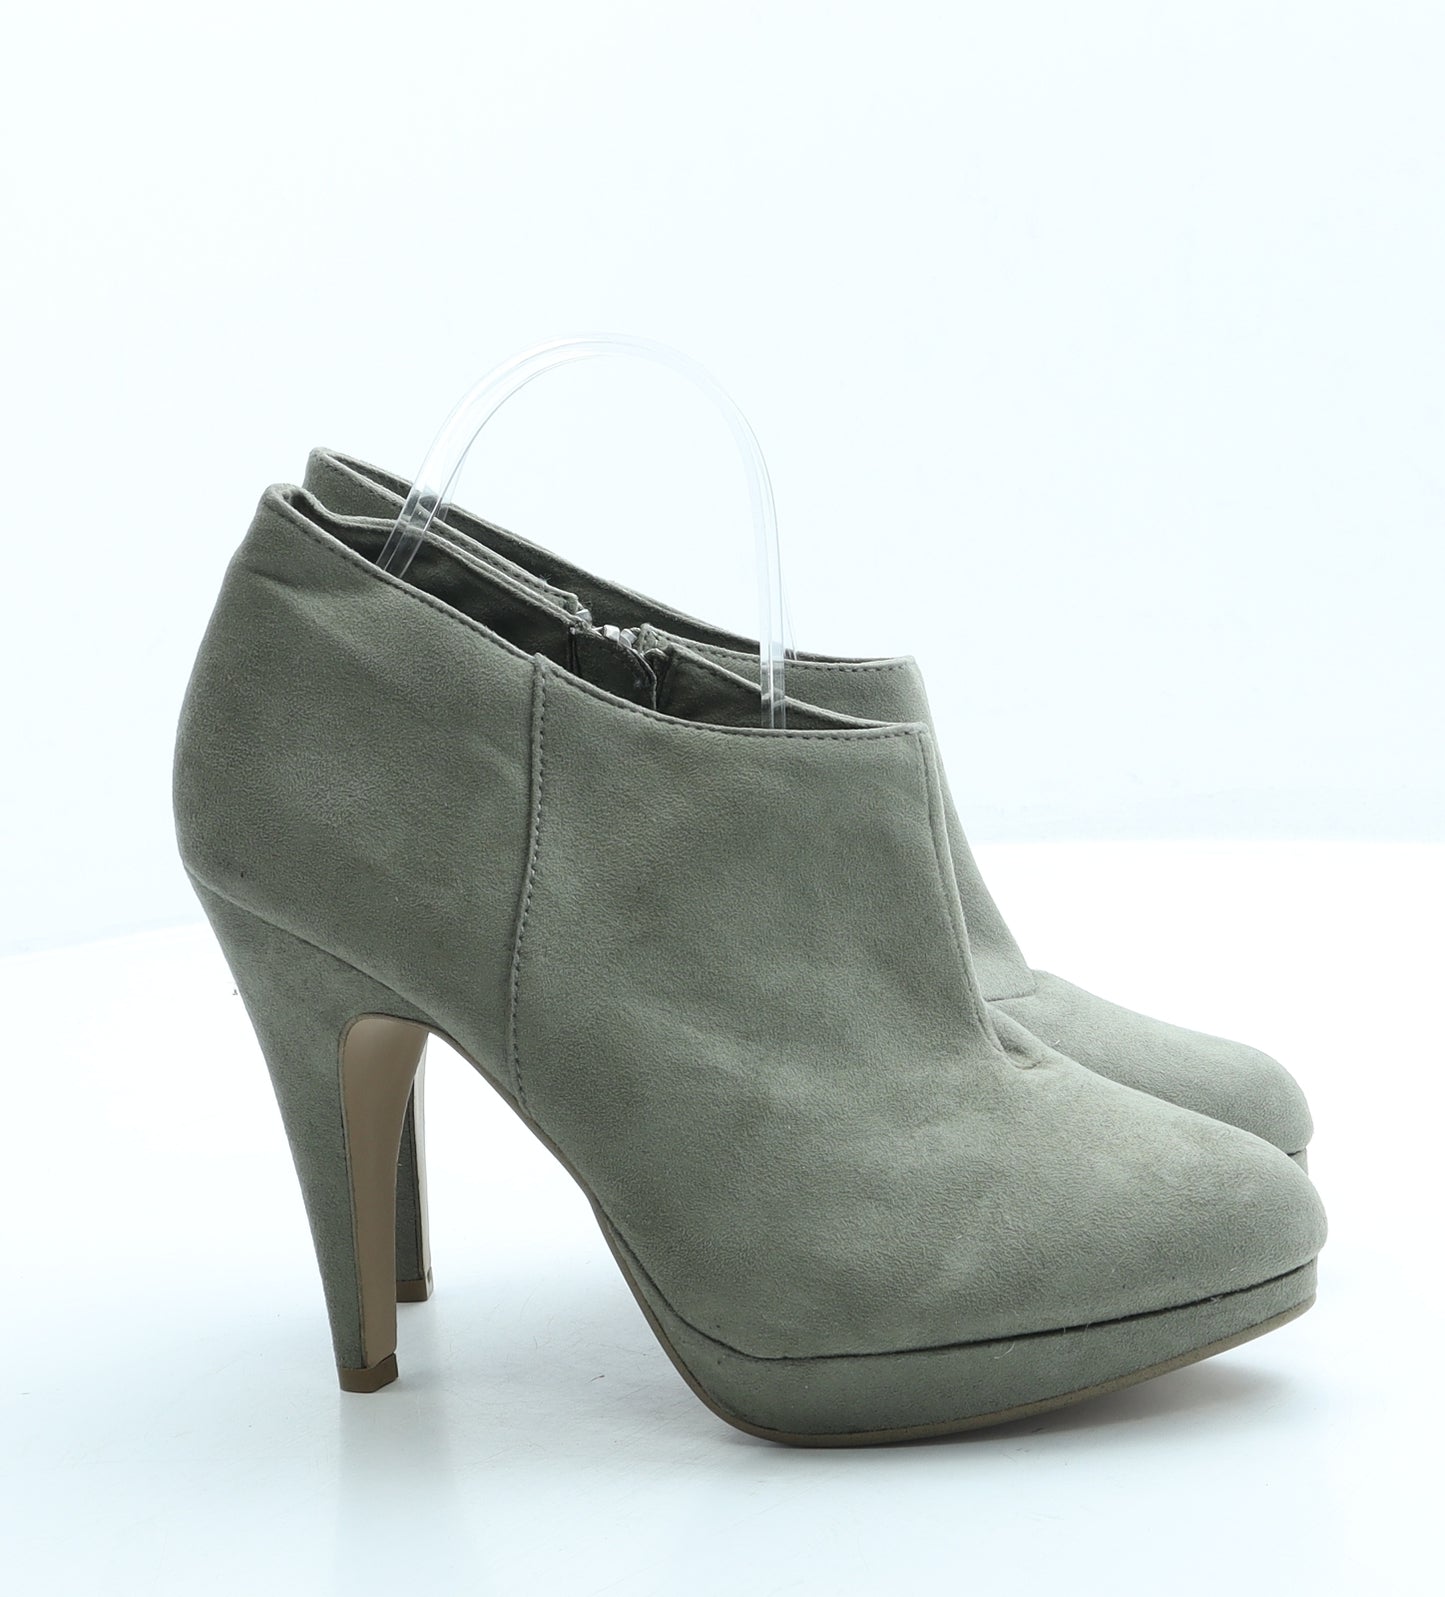 H&M Womens Green Suede Bootie Boot UK 7 40